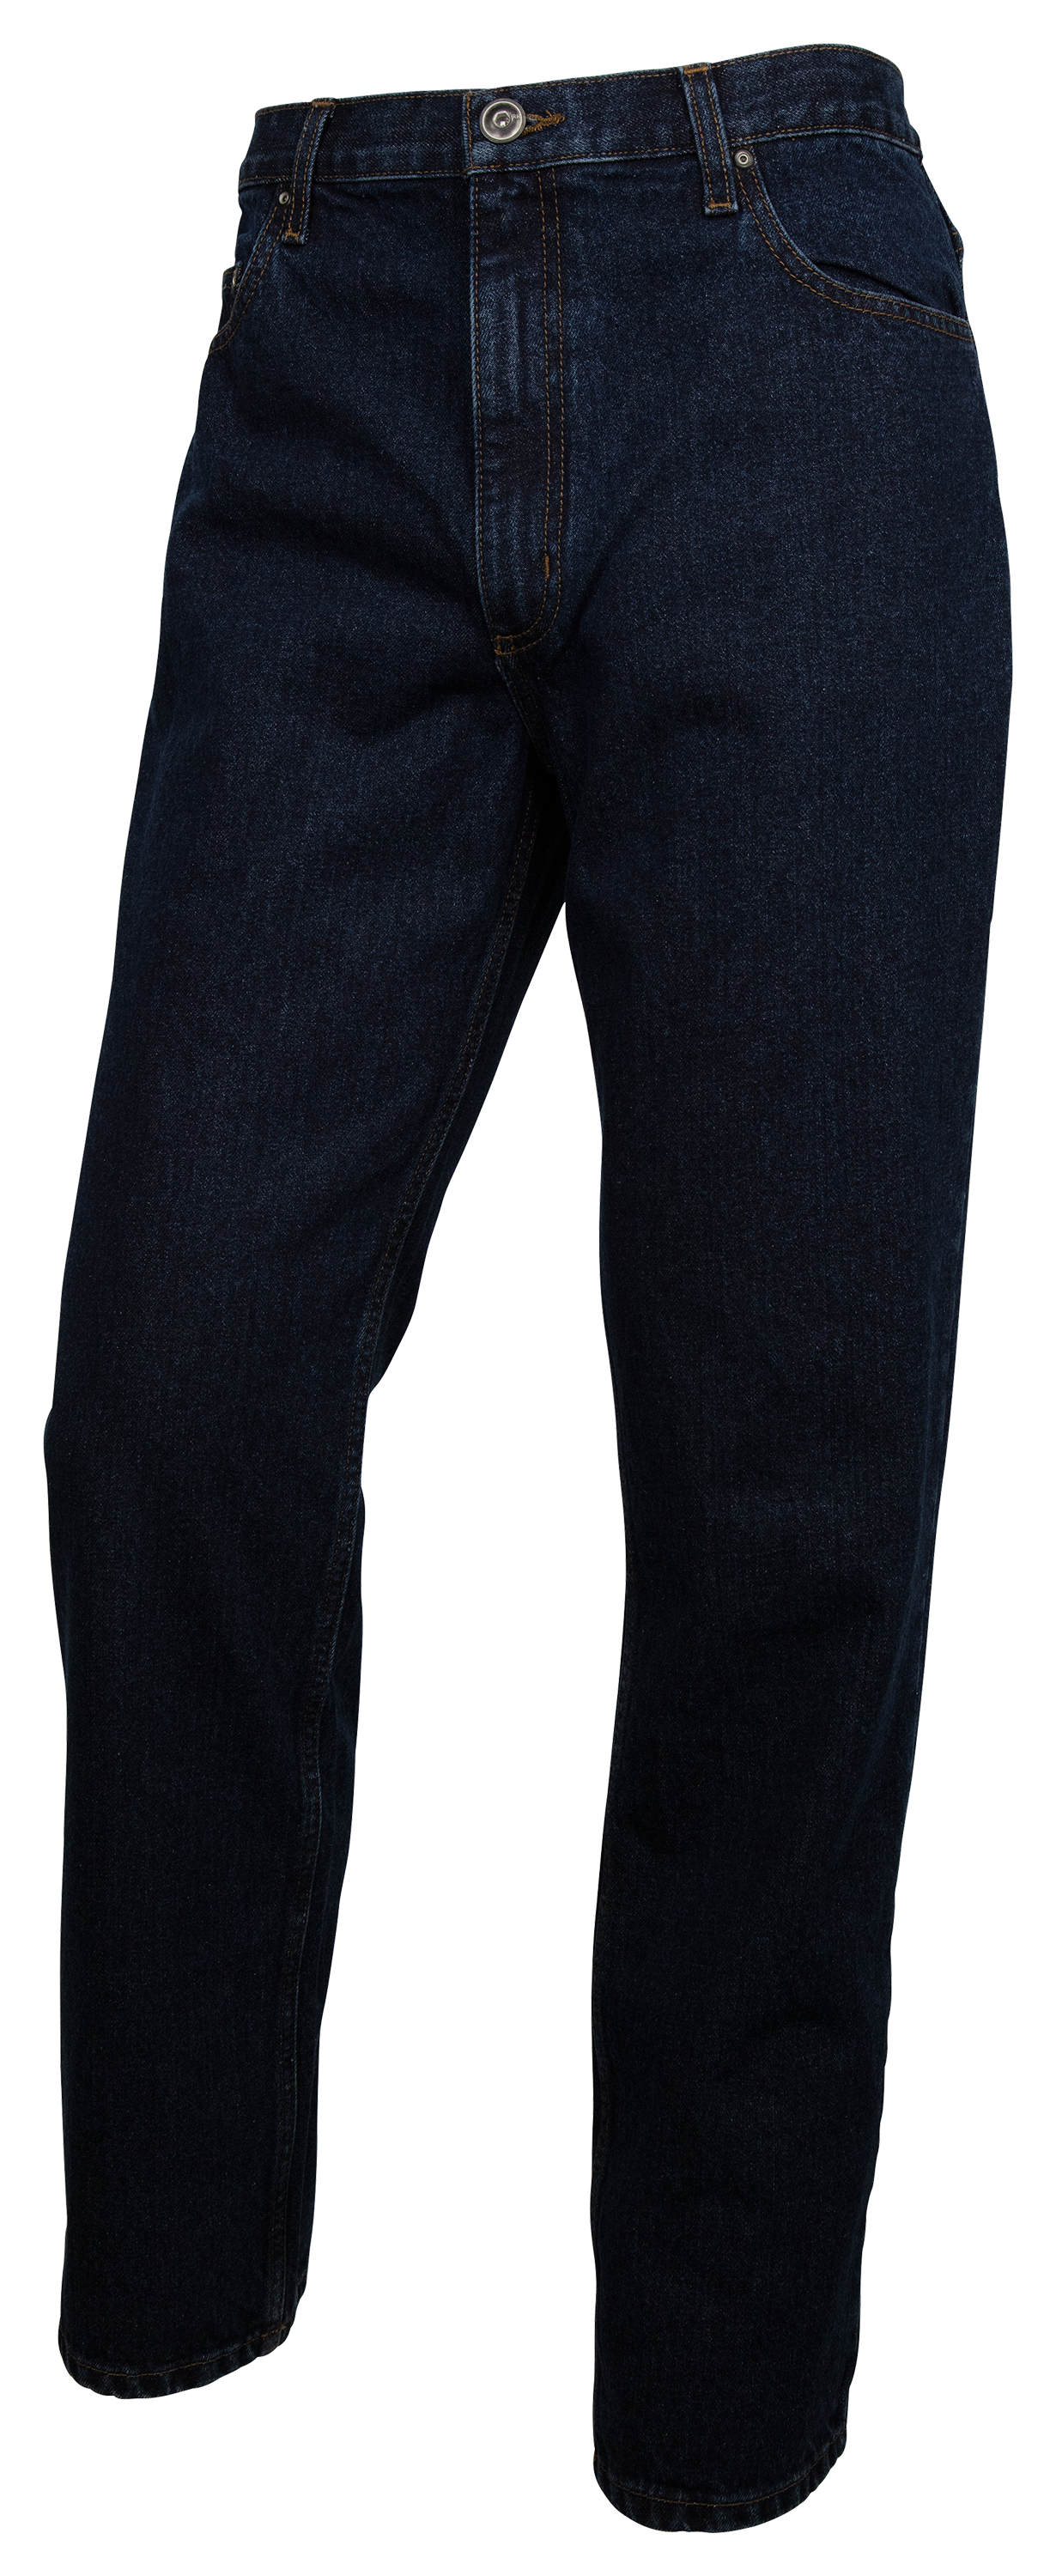 RedHead Relaxed Fit Jeans for Men